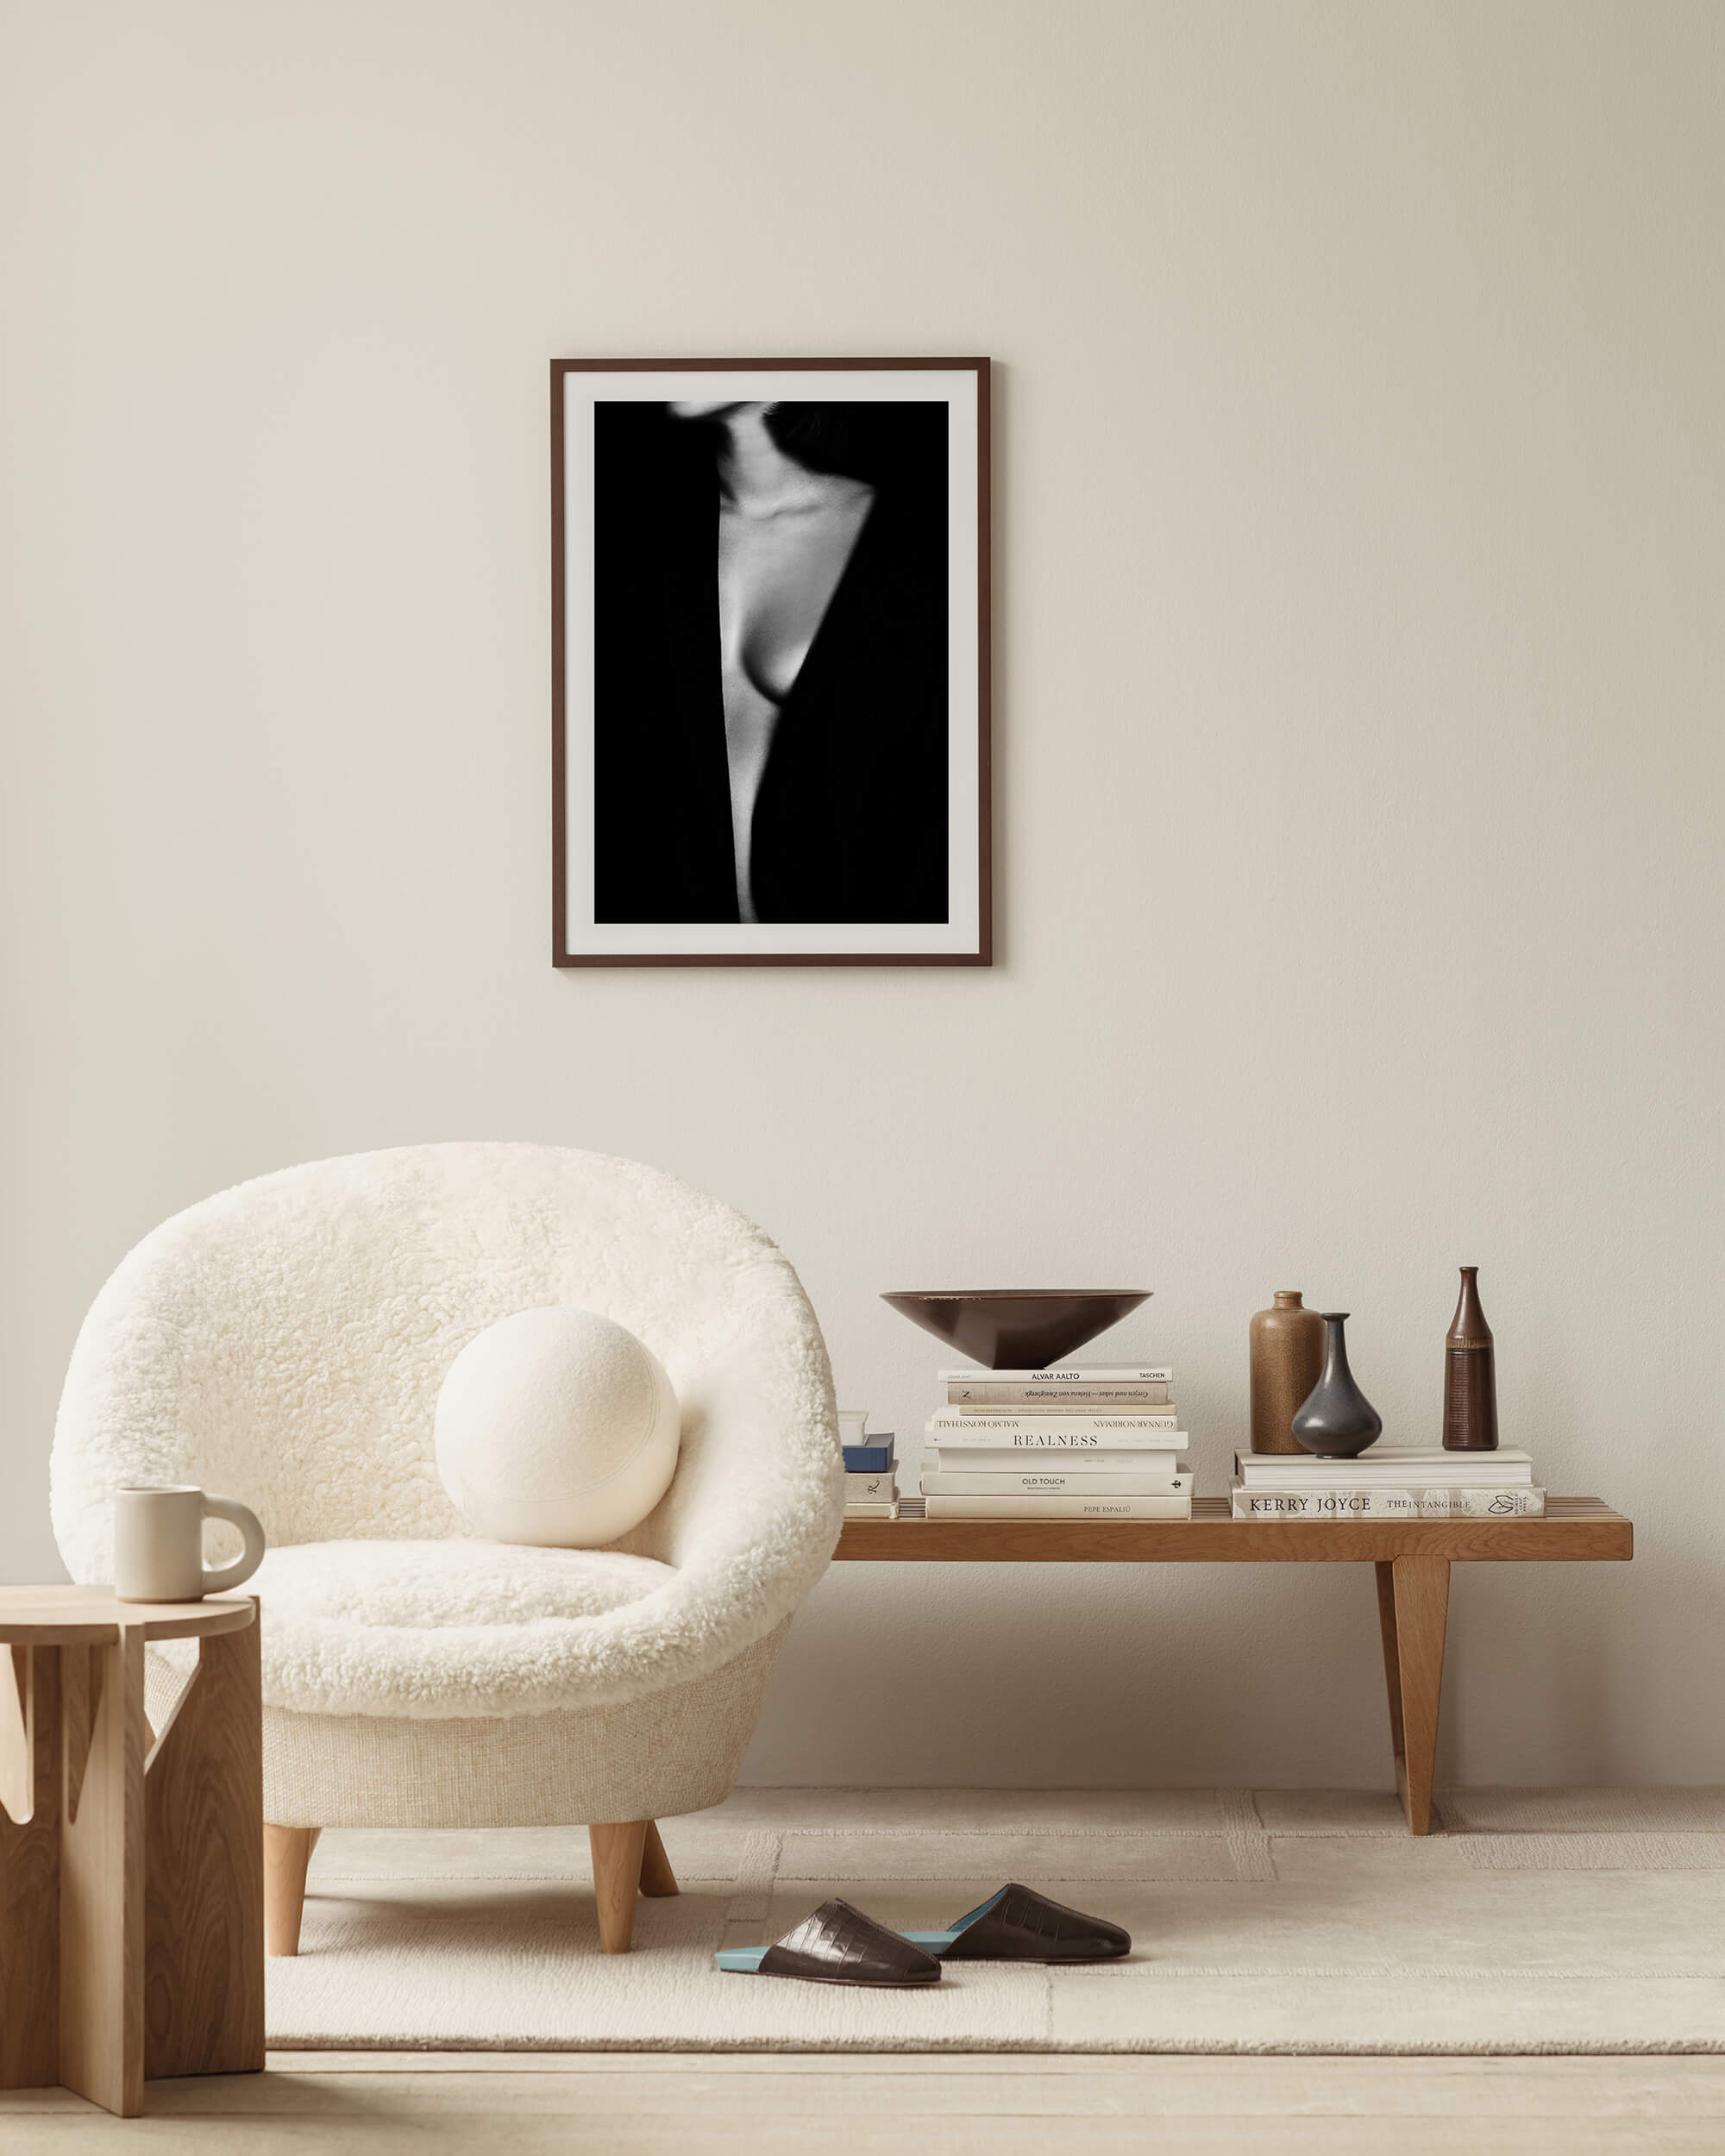 Black and white fashion wall art with oak details and nordic ceramics